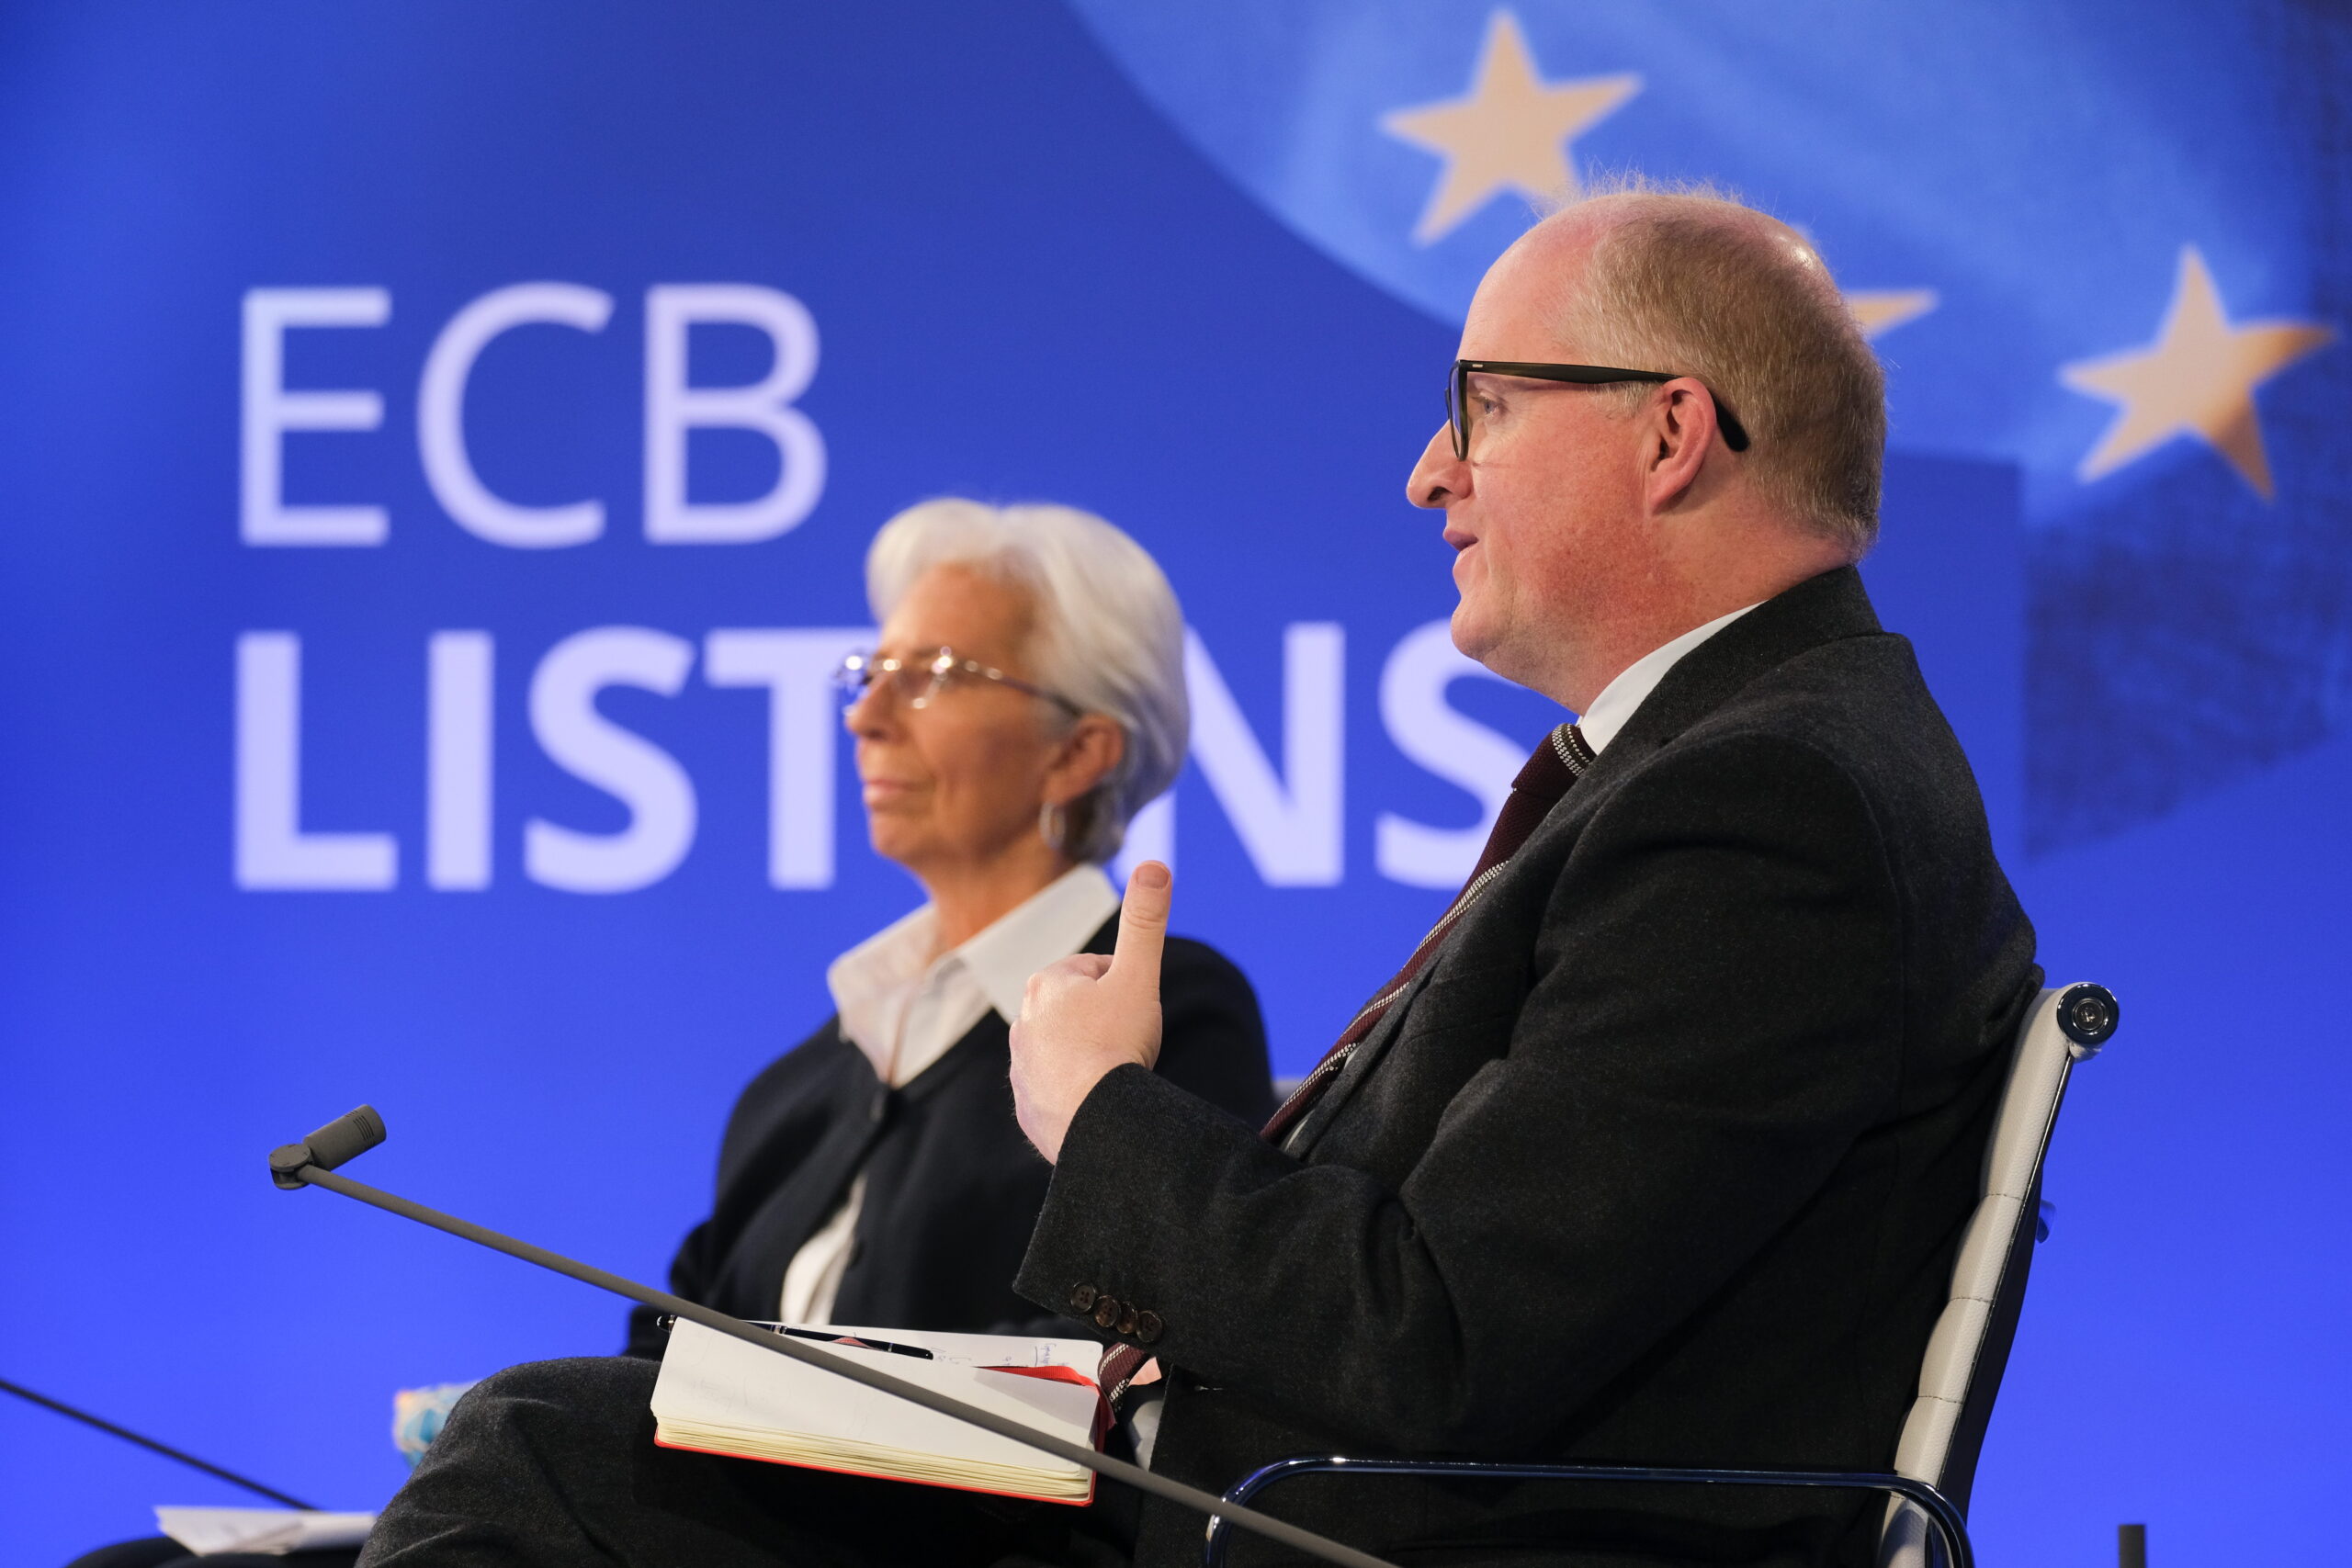 ECB Listens with Christine Lagarde and Philip Lane